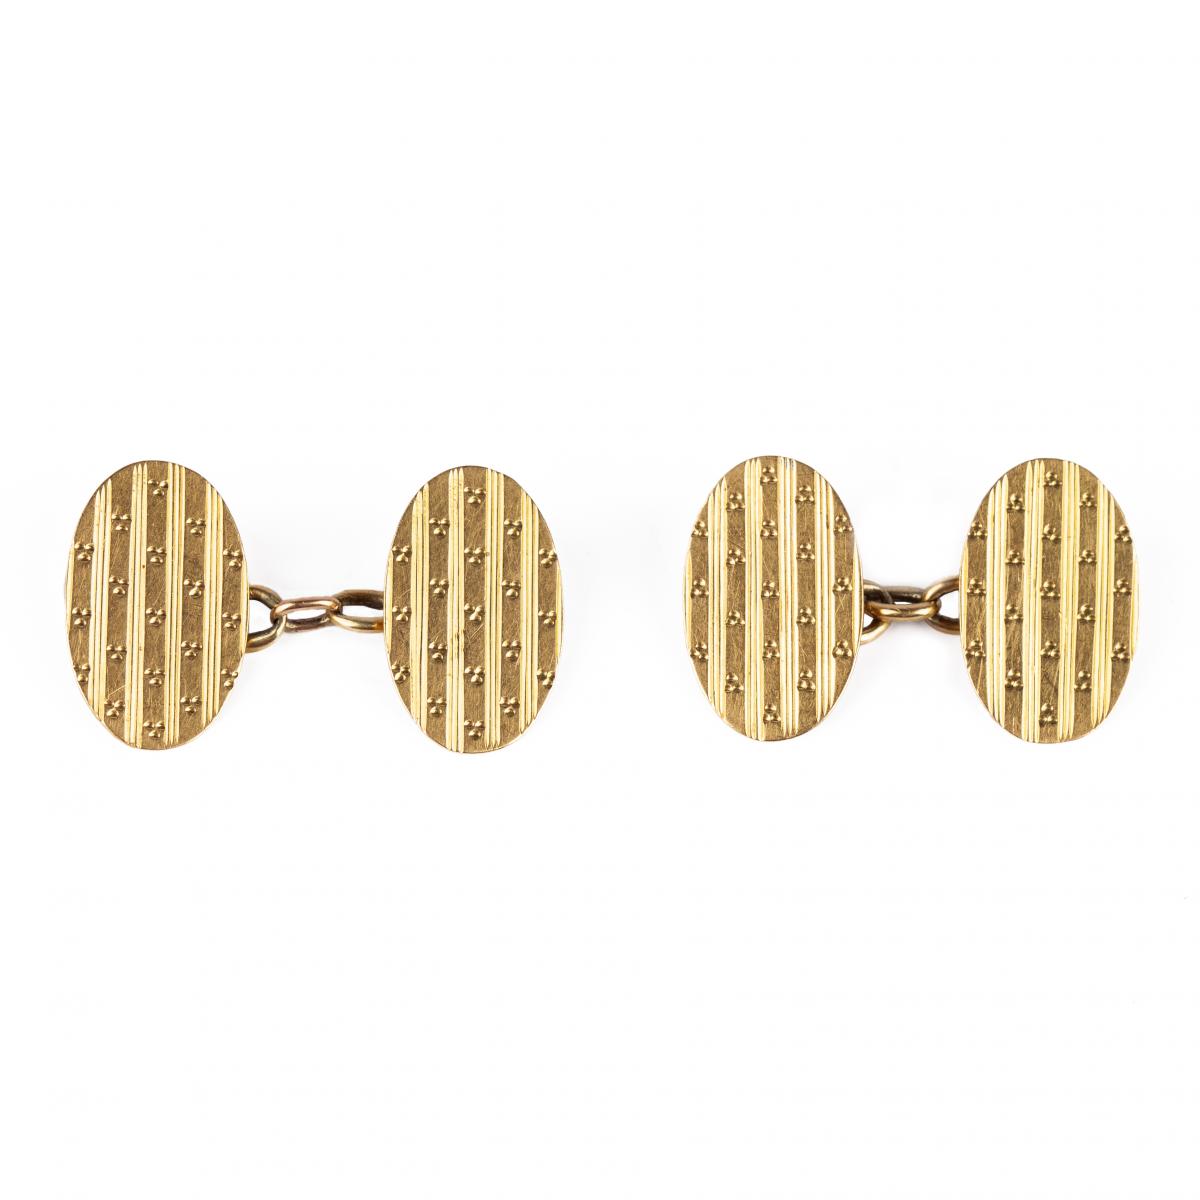 Antique 18 Carat Gold Classic Patterned Oval Cufflinks, English dated 1919.